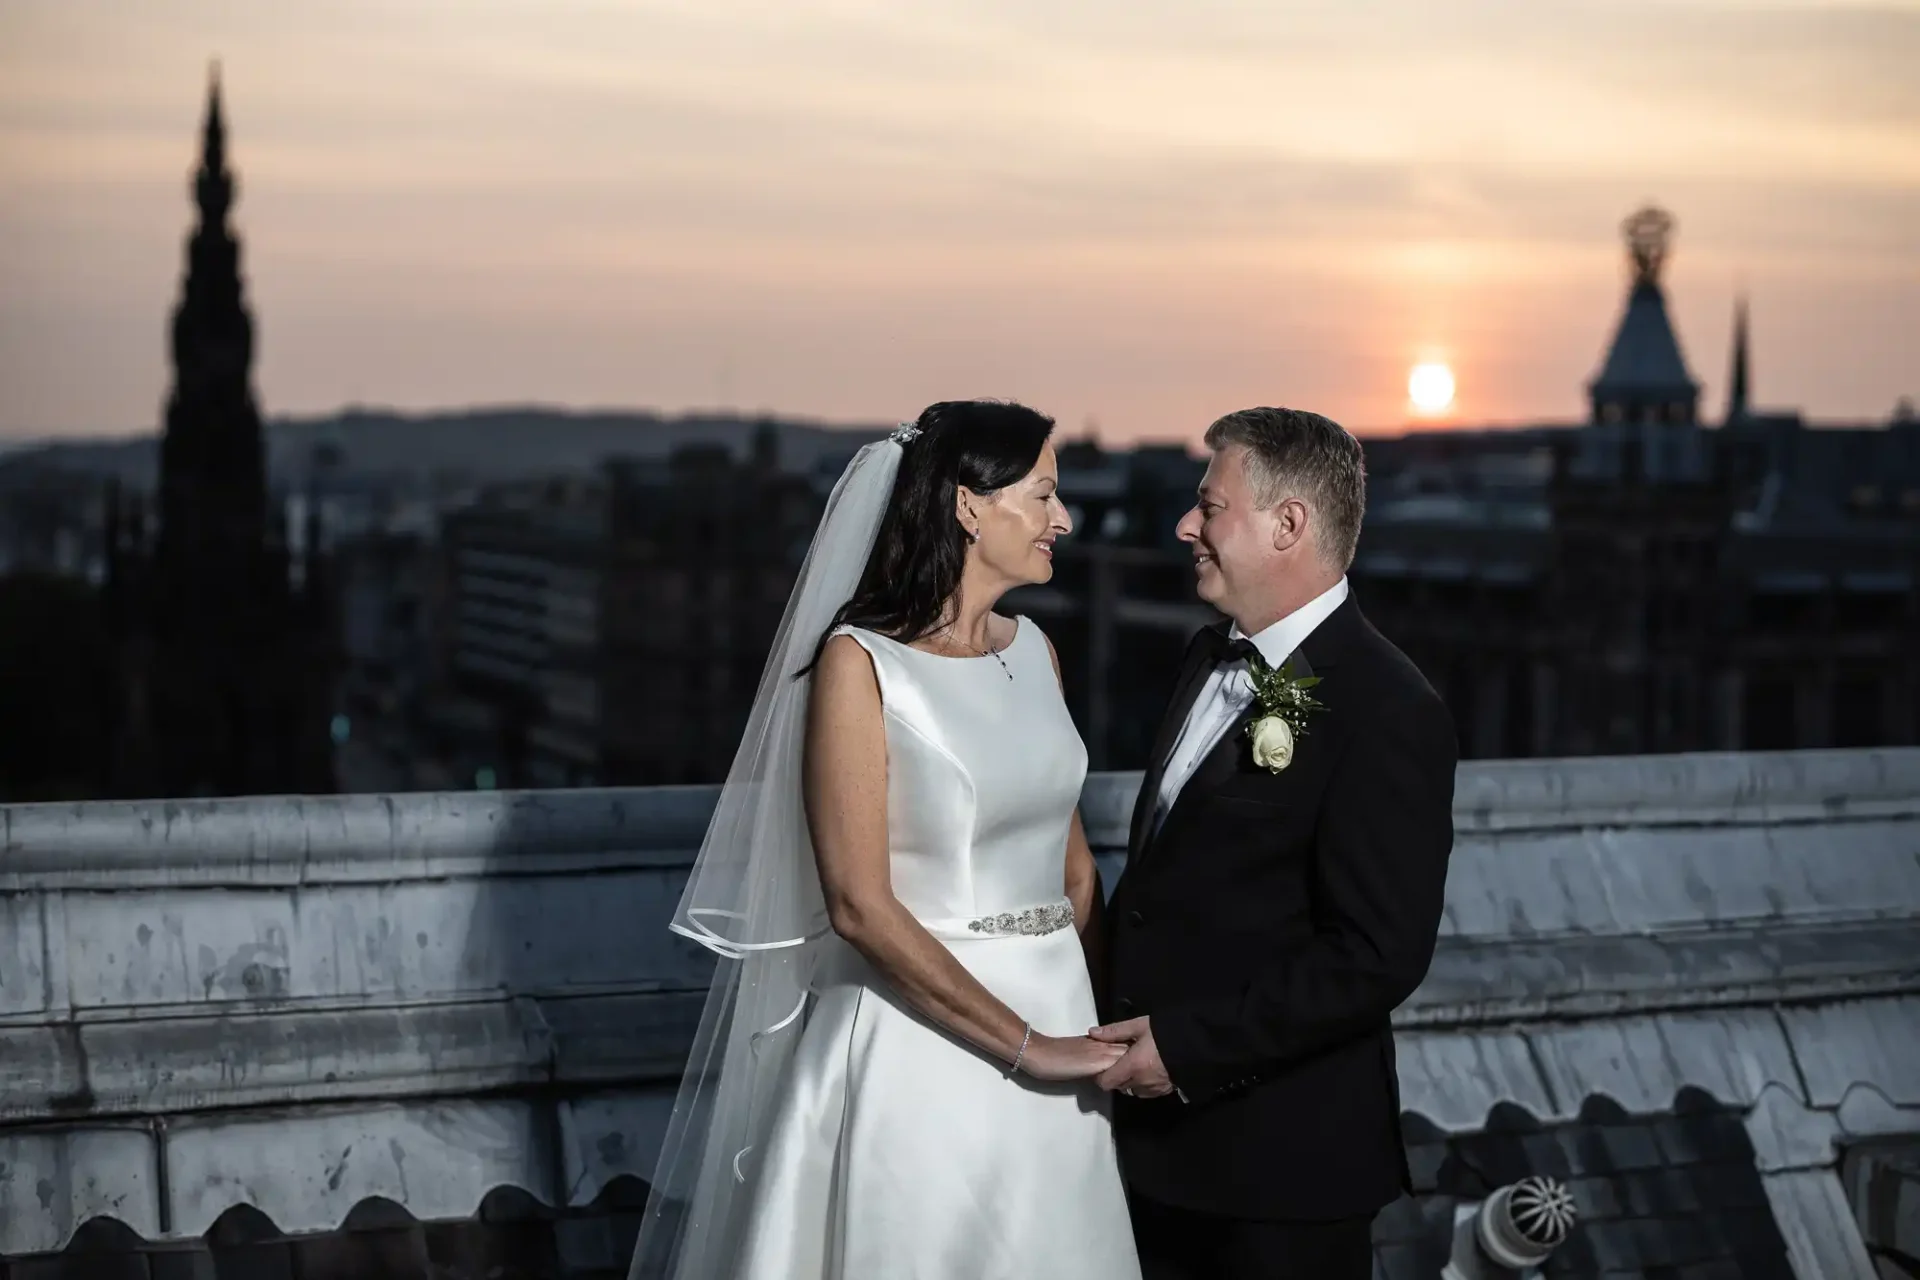 Bride and groom hold hands on a rooftop at sunset, with city skyline including a historic tower in the background.